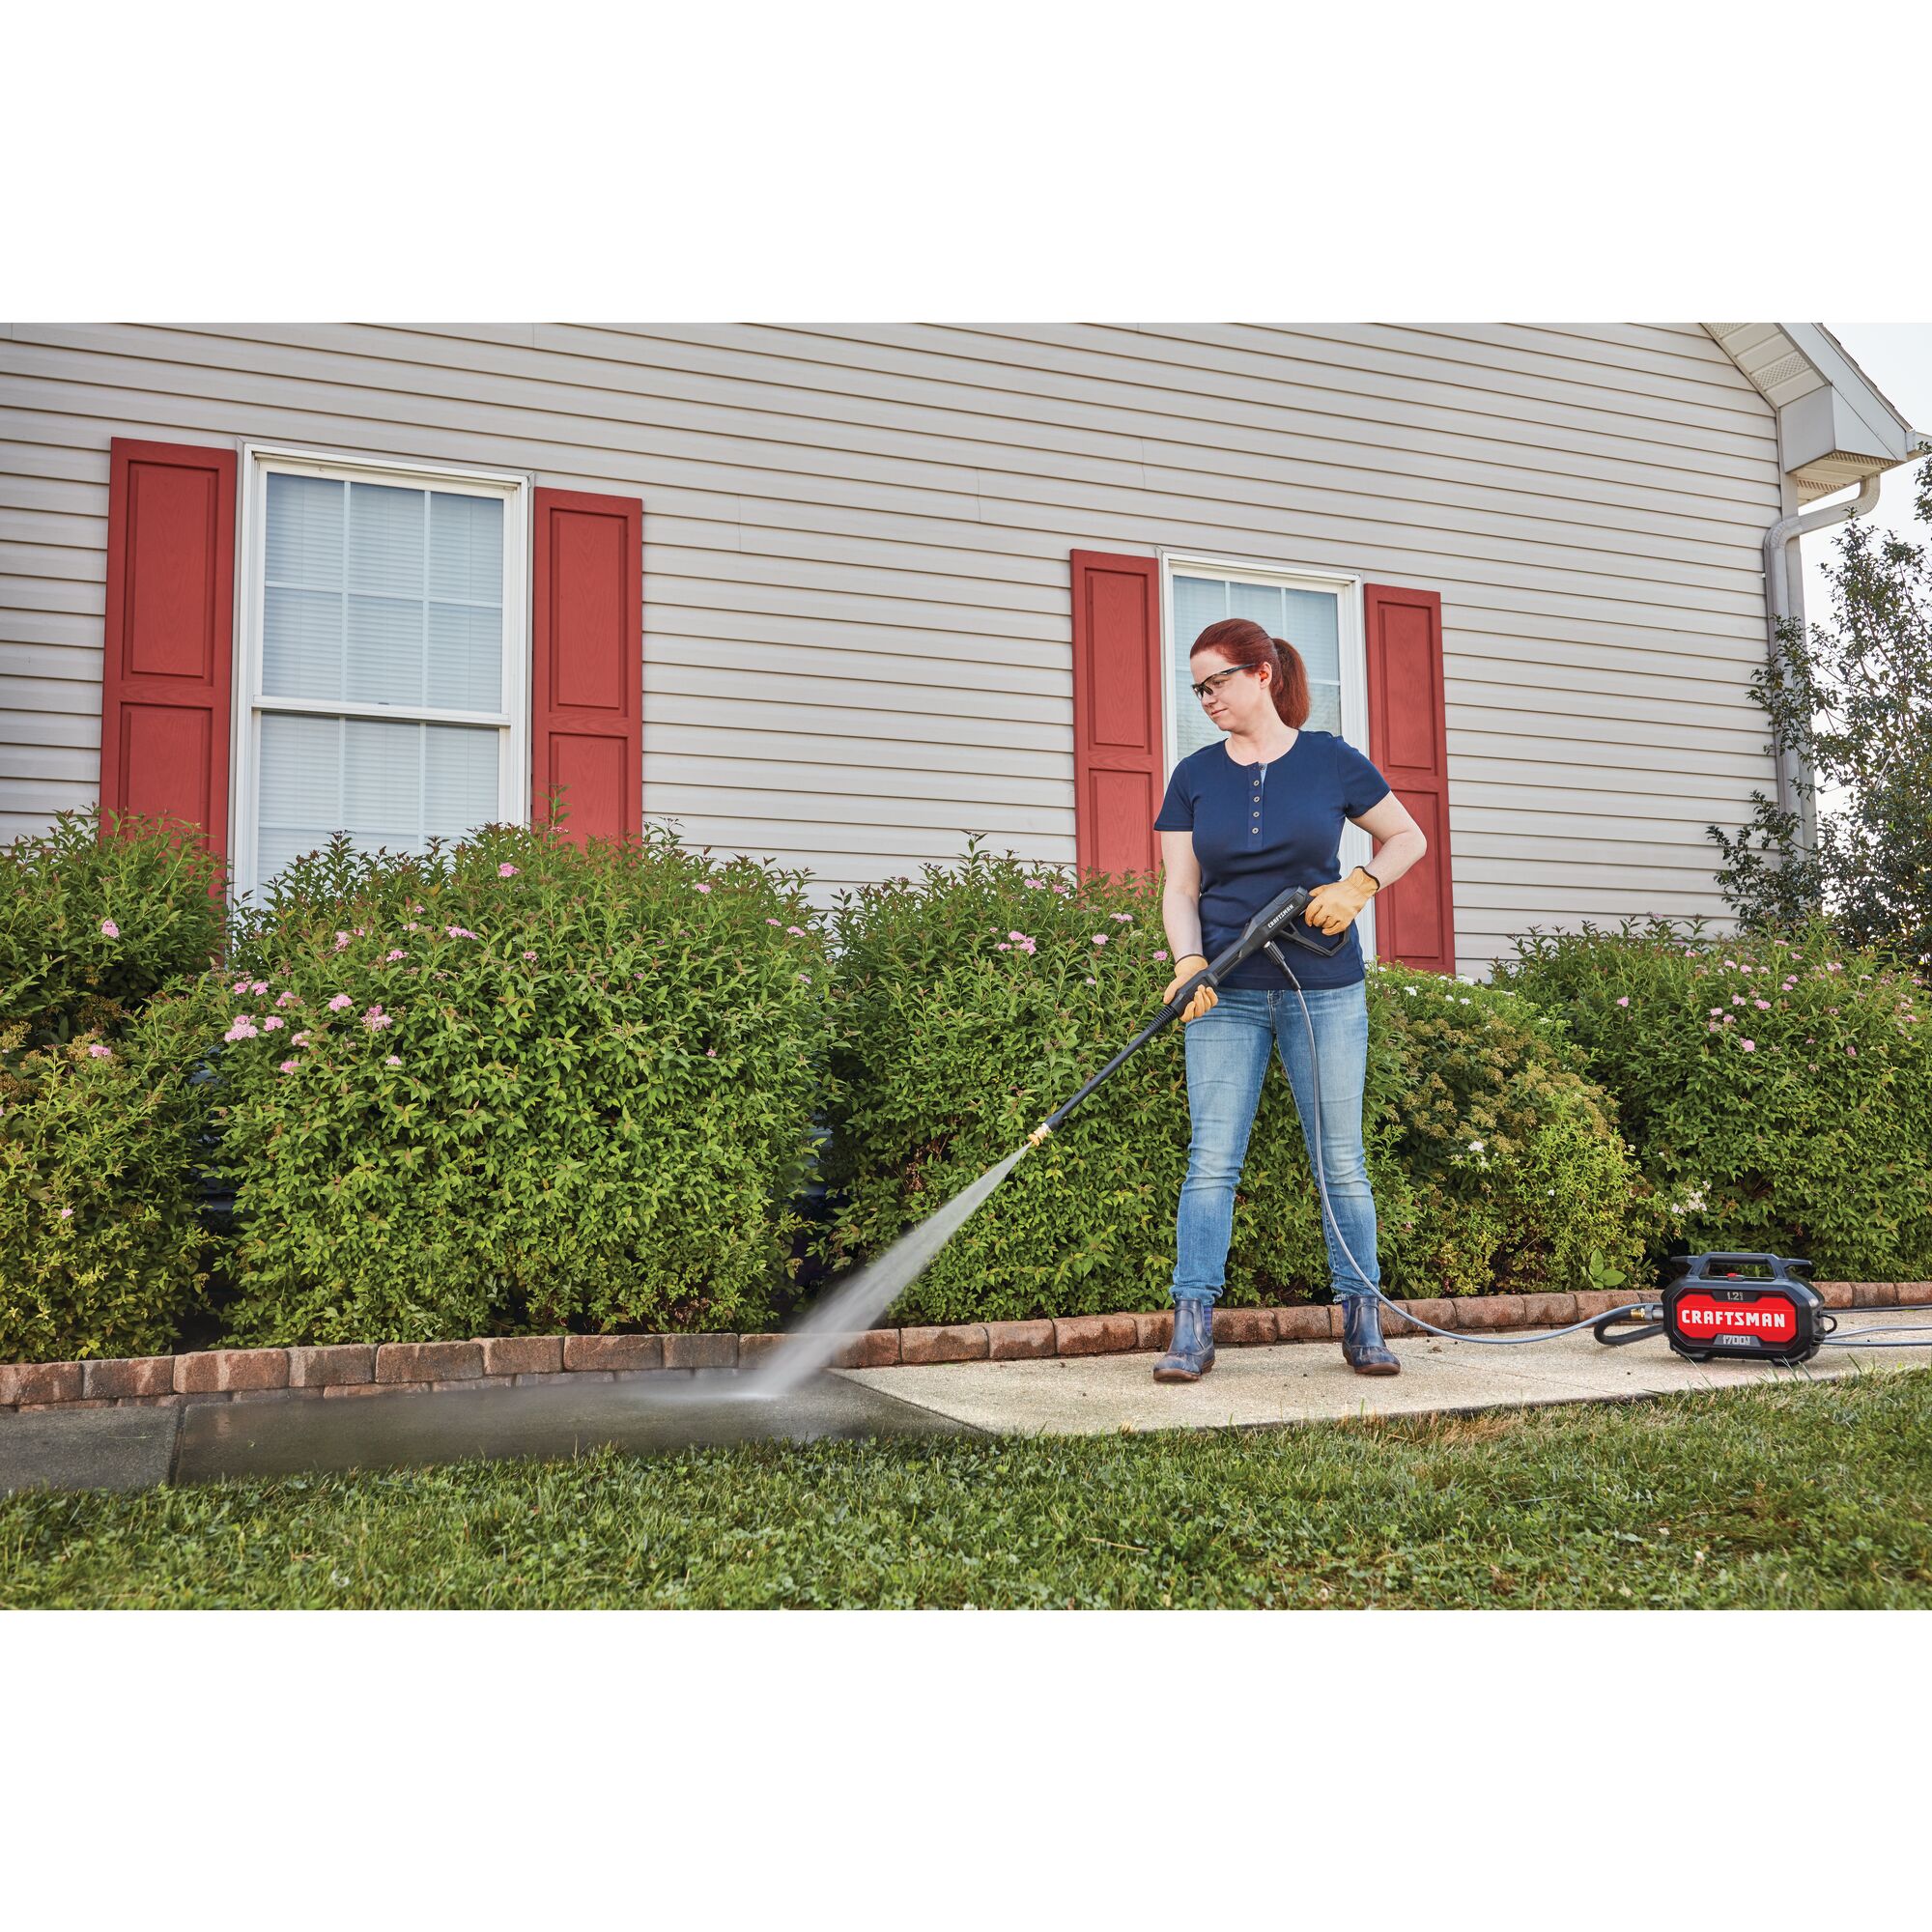 1700 pound per square inch electric compact cold water pressure washer being used by a person.